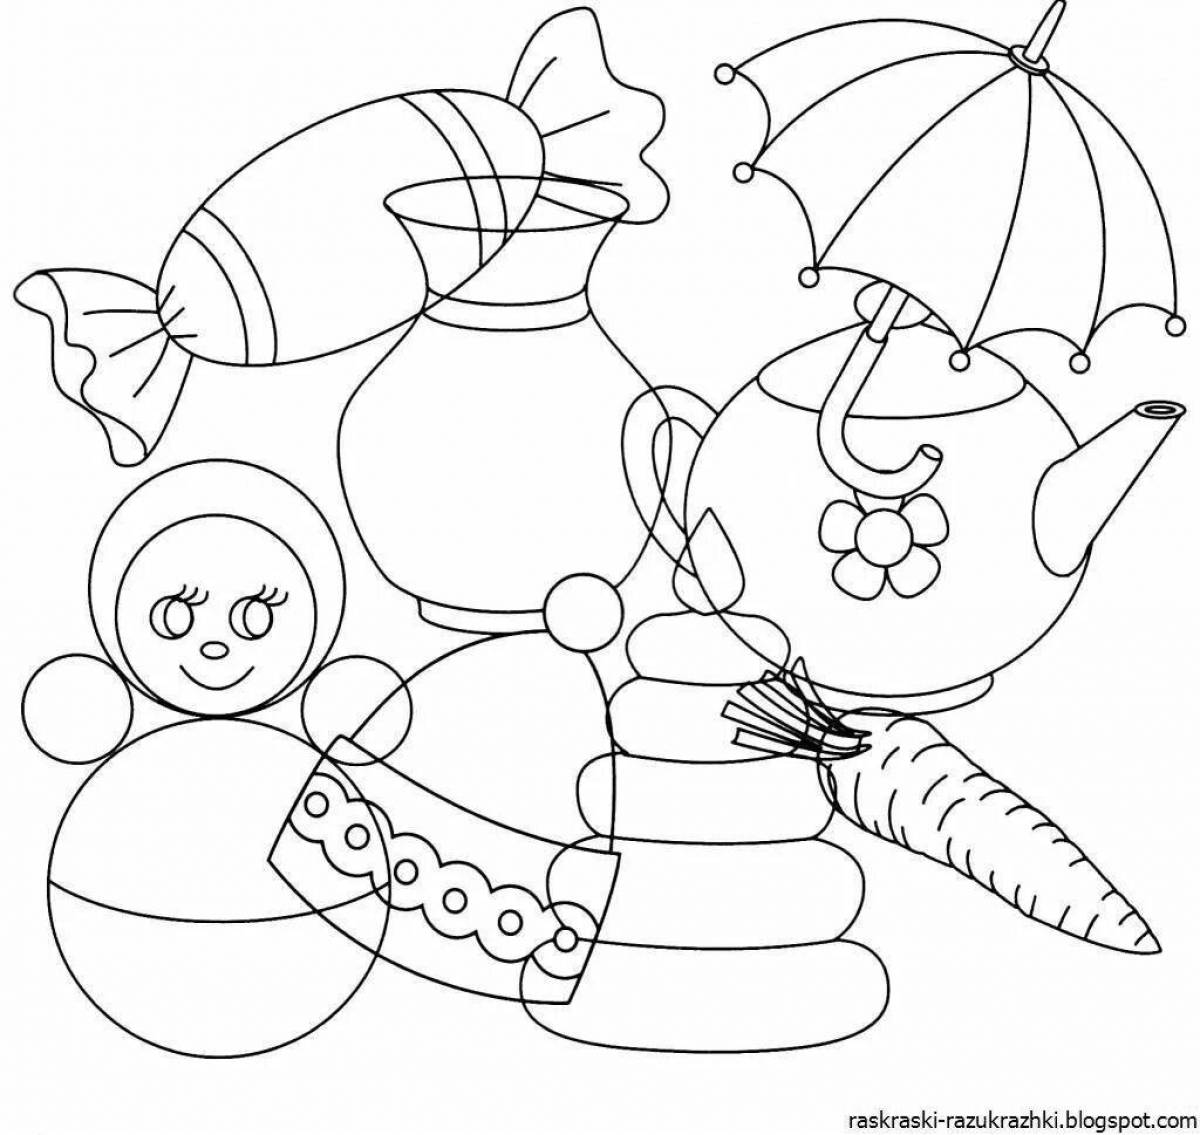 Award coloring games for 4 year olds